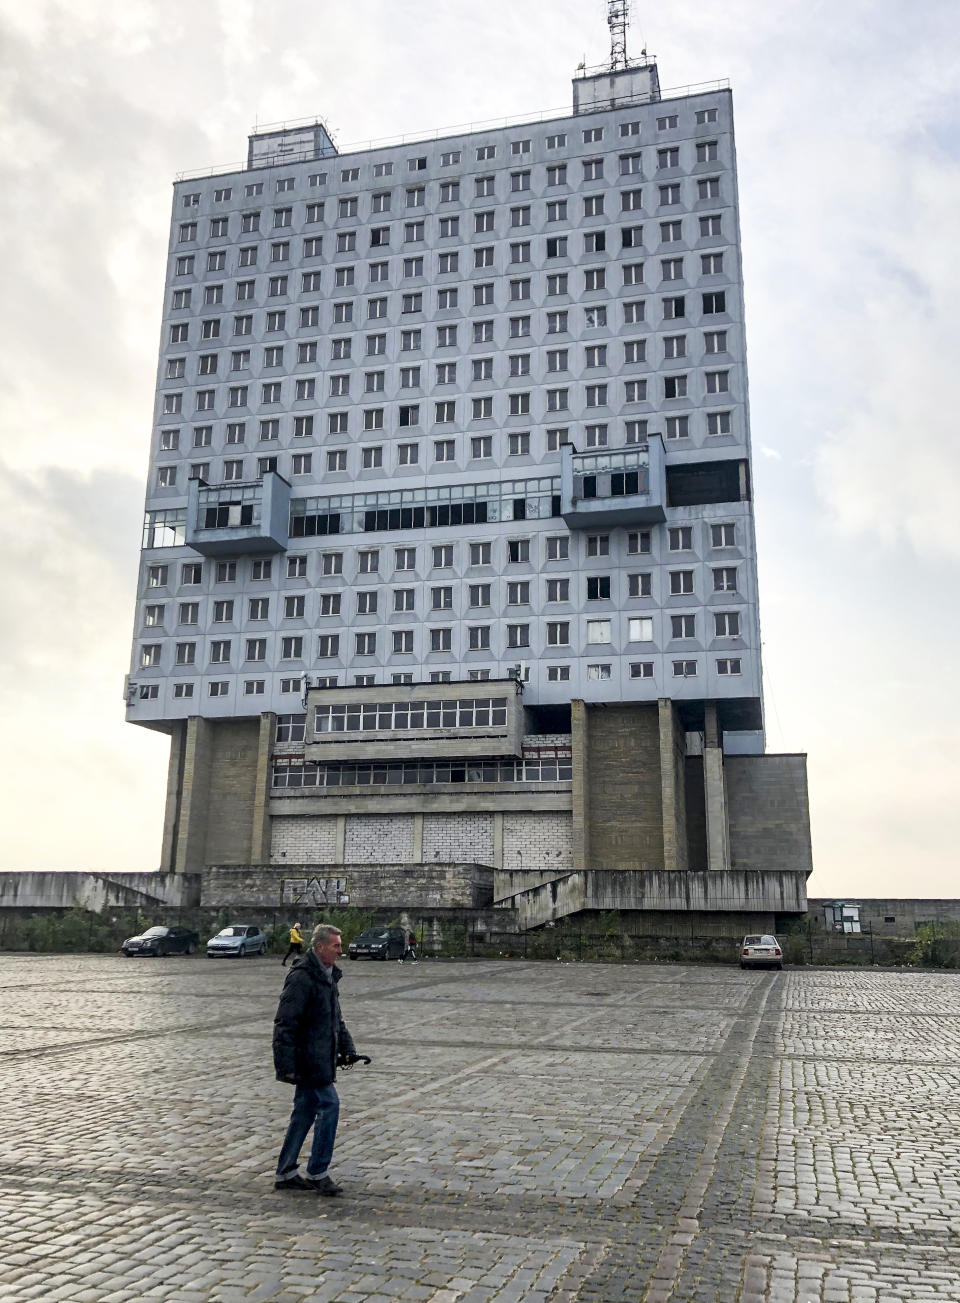 A man walks past the never-occupied building in Kaliningrad, Russia, Thursday, Oct. 29, 2020. The hulking never-occupied building sardonically likened to a robot's head that has loomed over the city of Kaliningrad for decades is to be demolished next year, the region's governor says. The 21-story House of Soviets was left unfinished when funding ran out in 1985 amid the Soviet Union's economic struggles and later was assessed to be structurally unsound. (AP Photo/James Heintz)